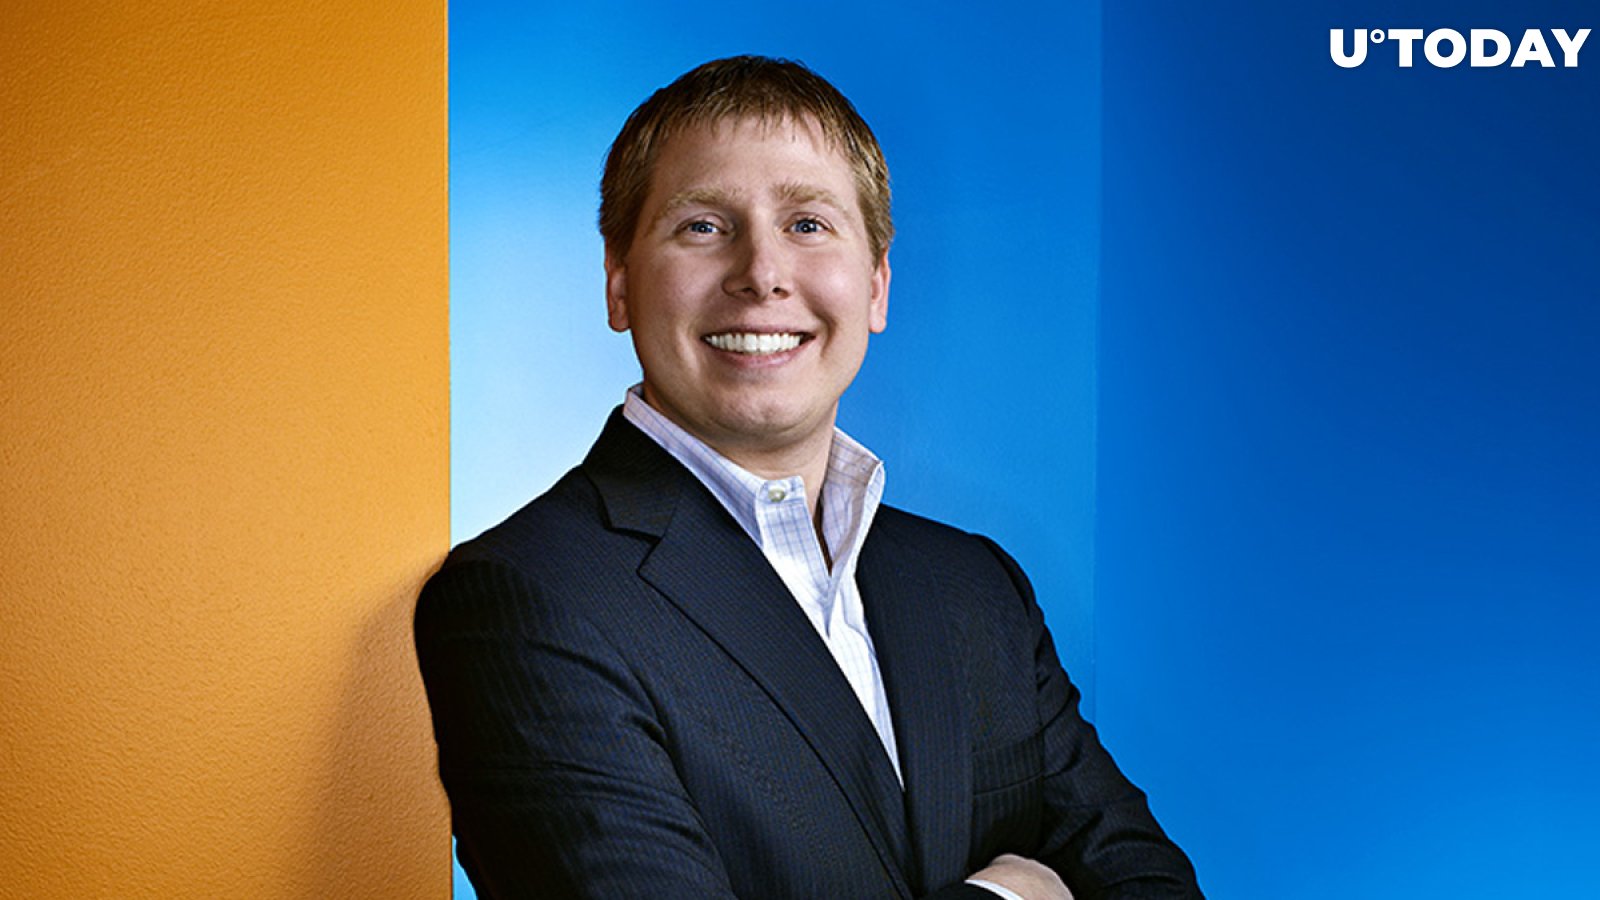 Barry Silbert Predicts There Will Be Publicly Traded Crypto Companies in 2020